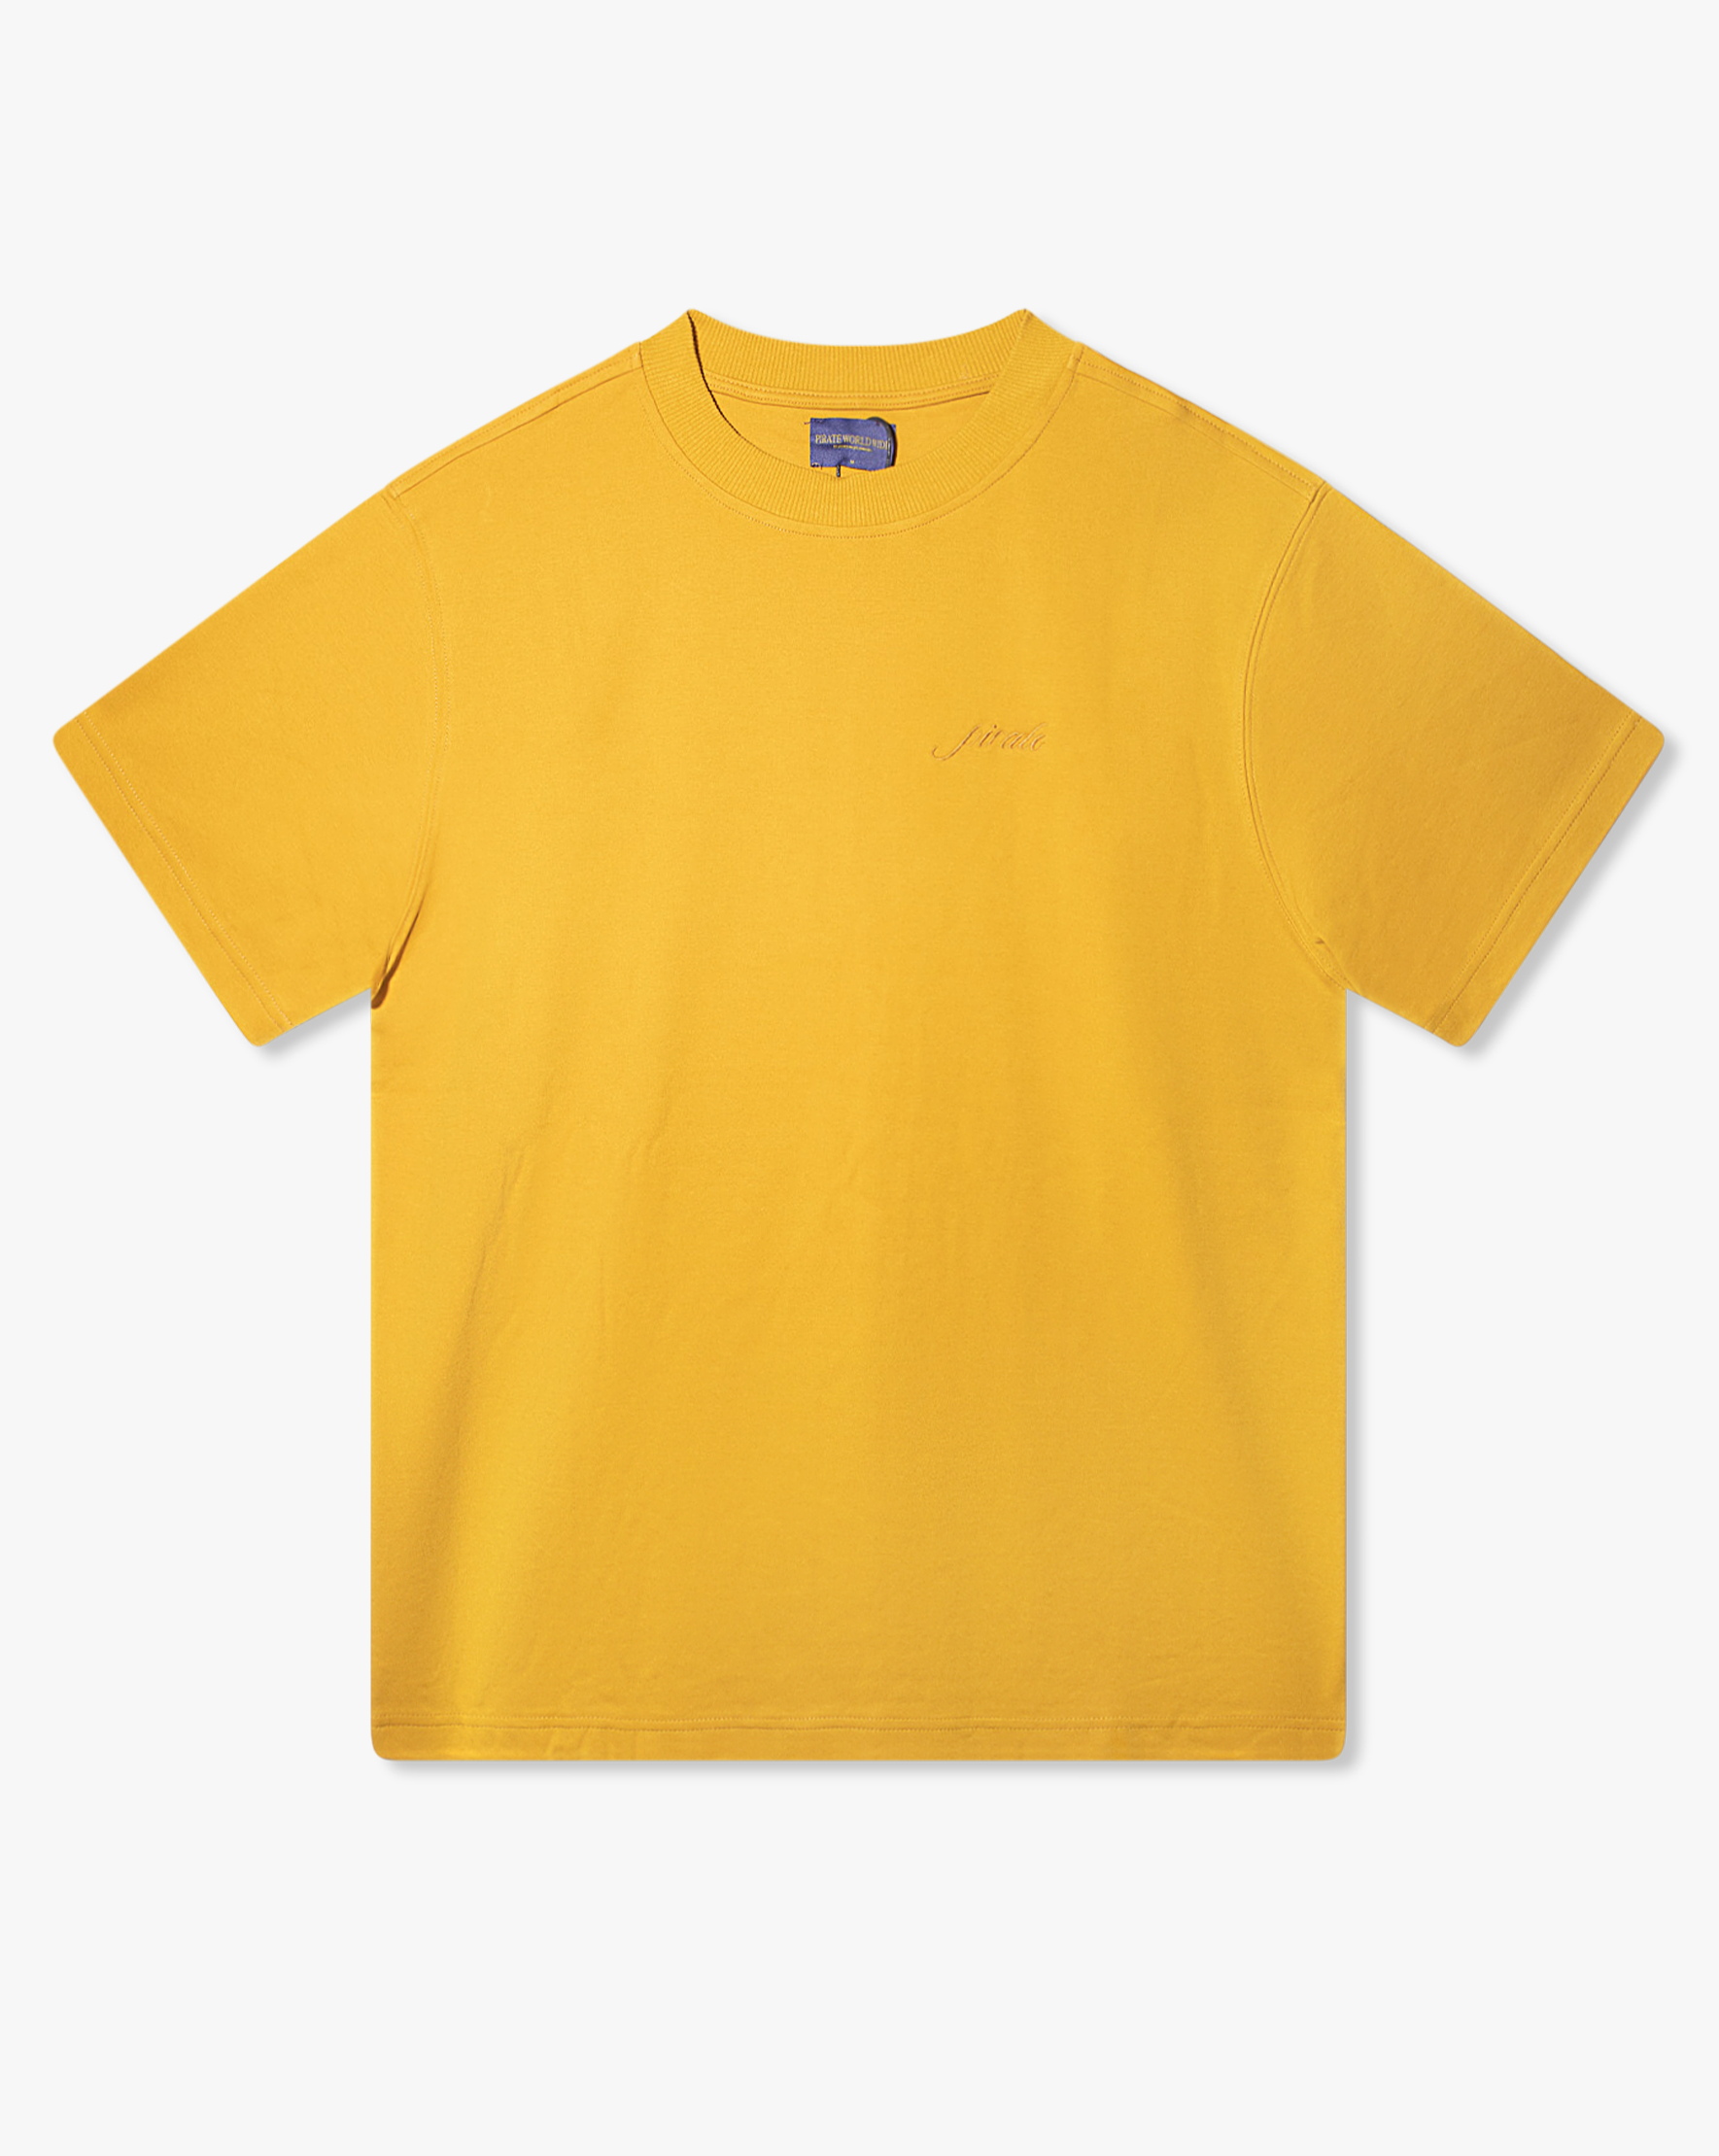 Pirate Hilltop T-Shirt (Canary Yellow)